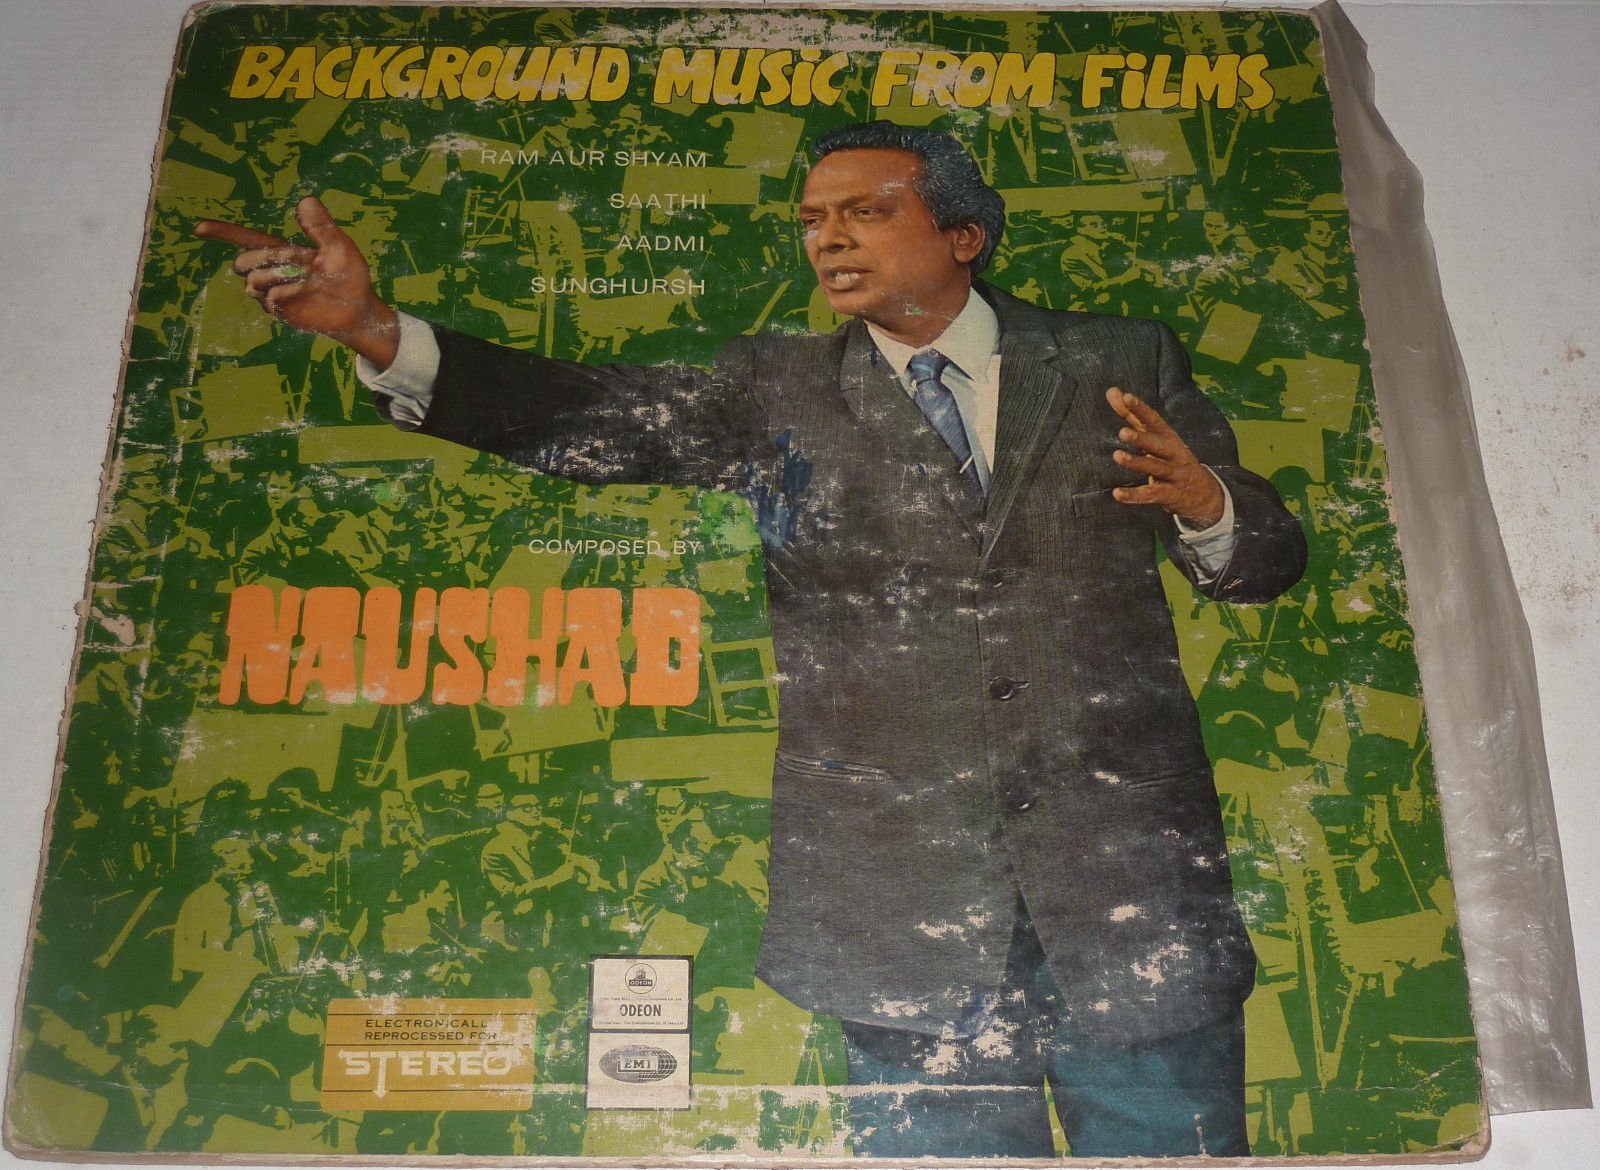  - Naushad - Background Music from Films - LP Vinyl Record  Bollywood D/MOCE. 4016 - auction details